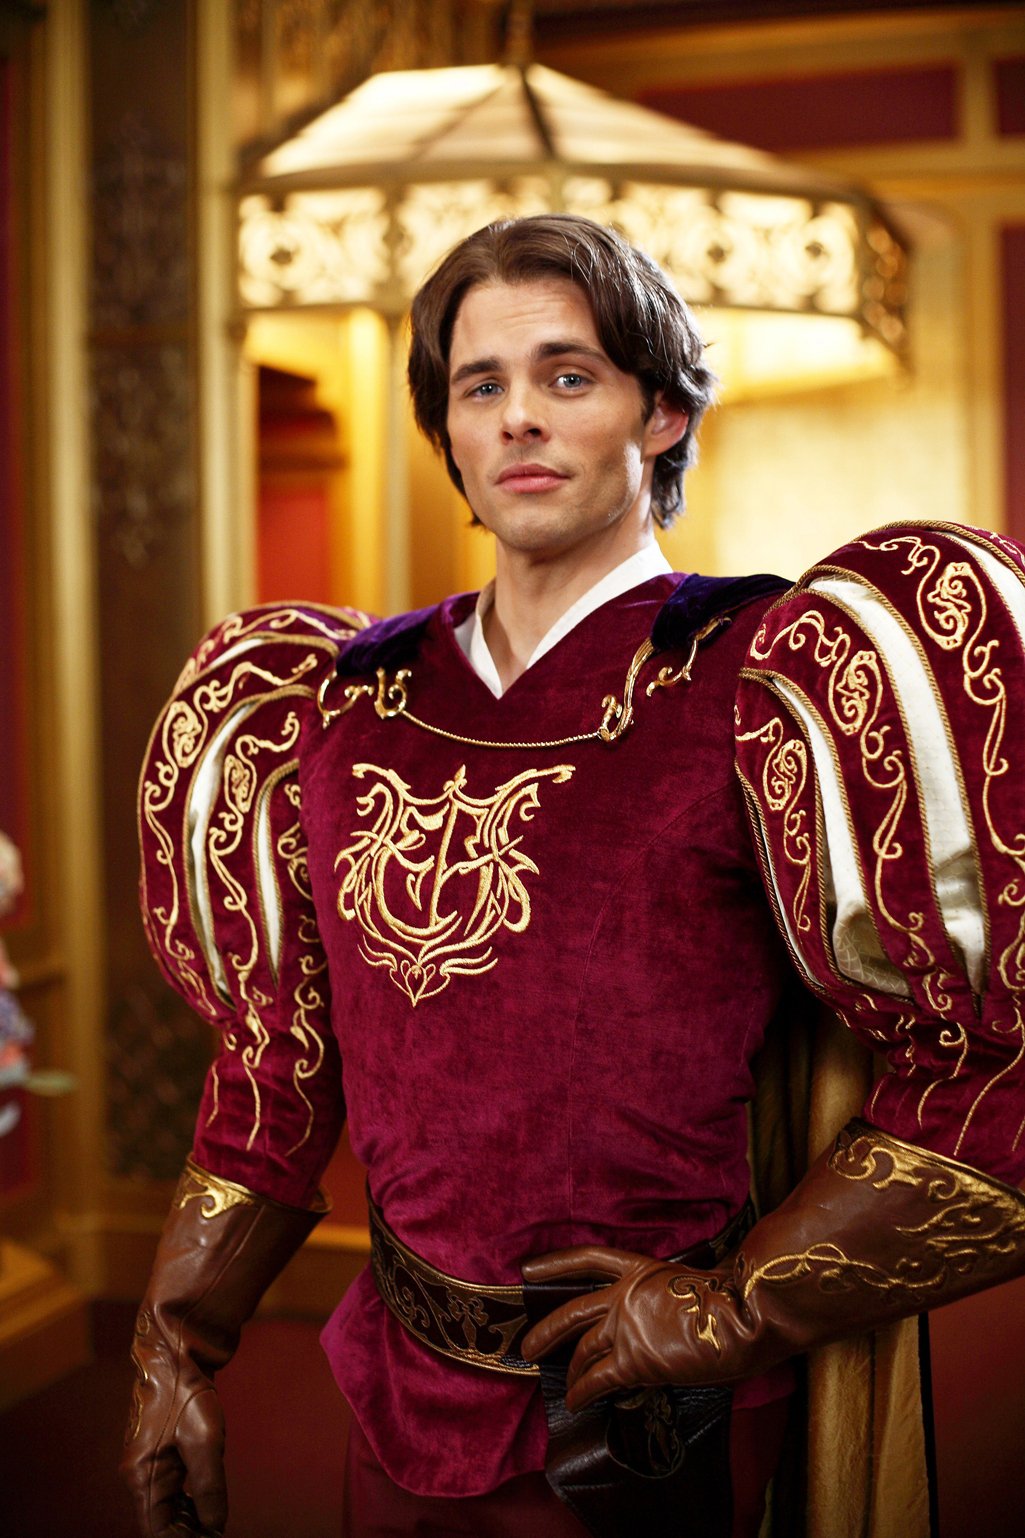 James Marsden teases another ridiculous costume for Disenchanted following those iconic giant puff sleeves